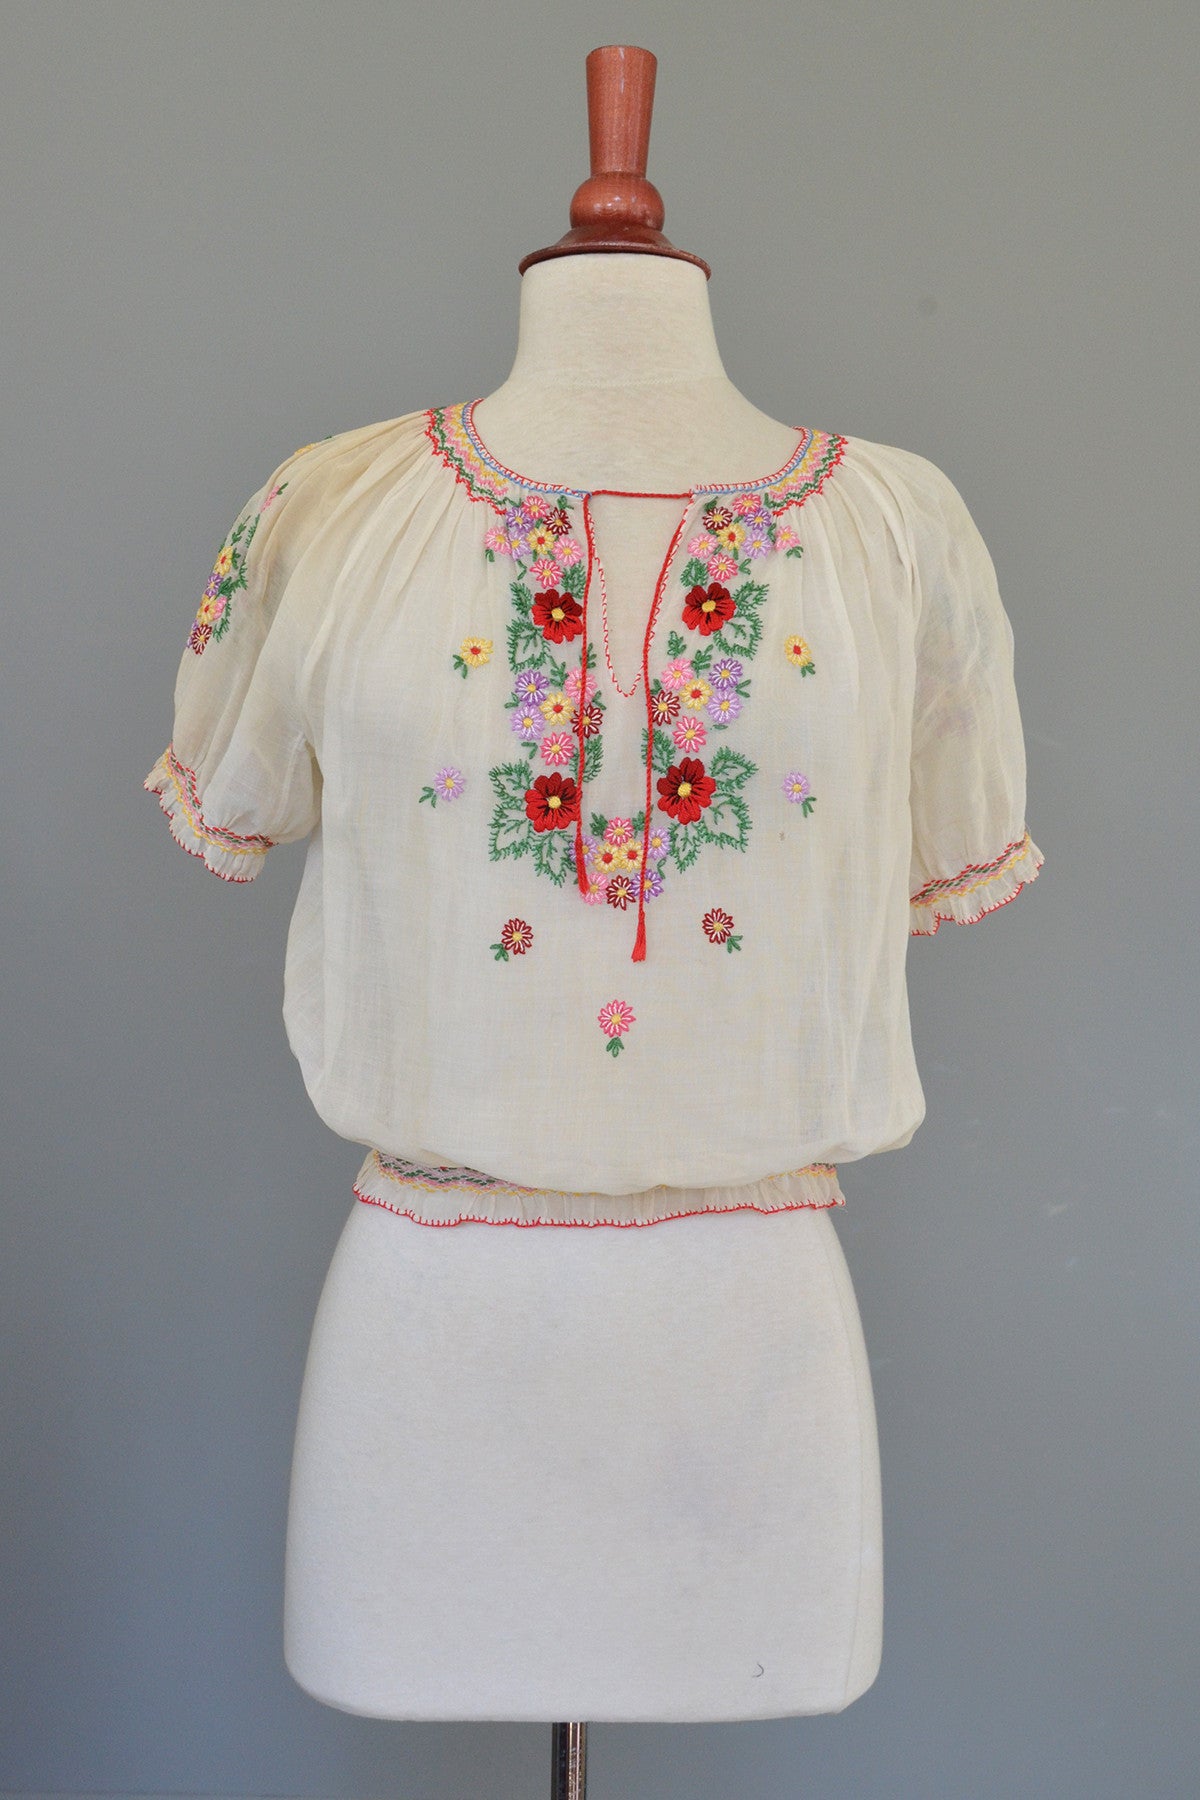 Off White Chiffon Embroidered Spring Flowers Peasant Top | VintageVirtuosa